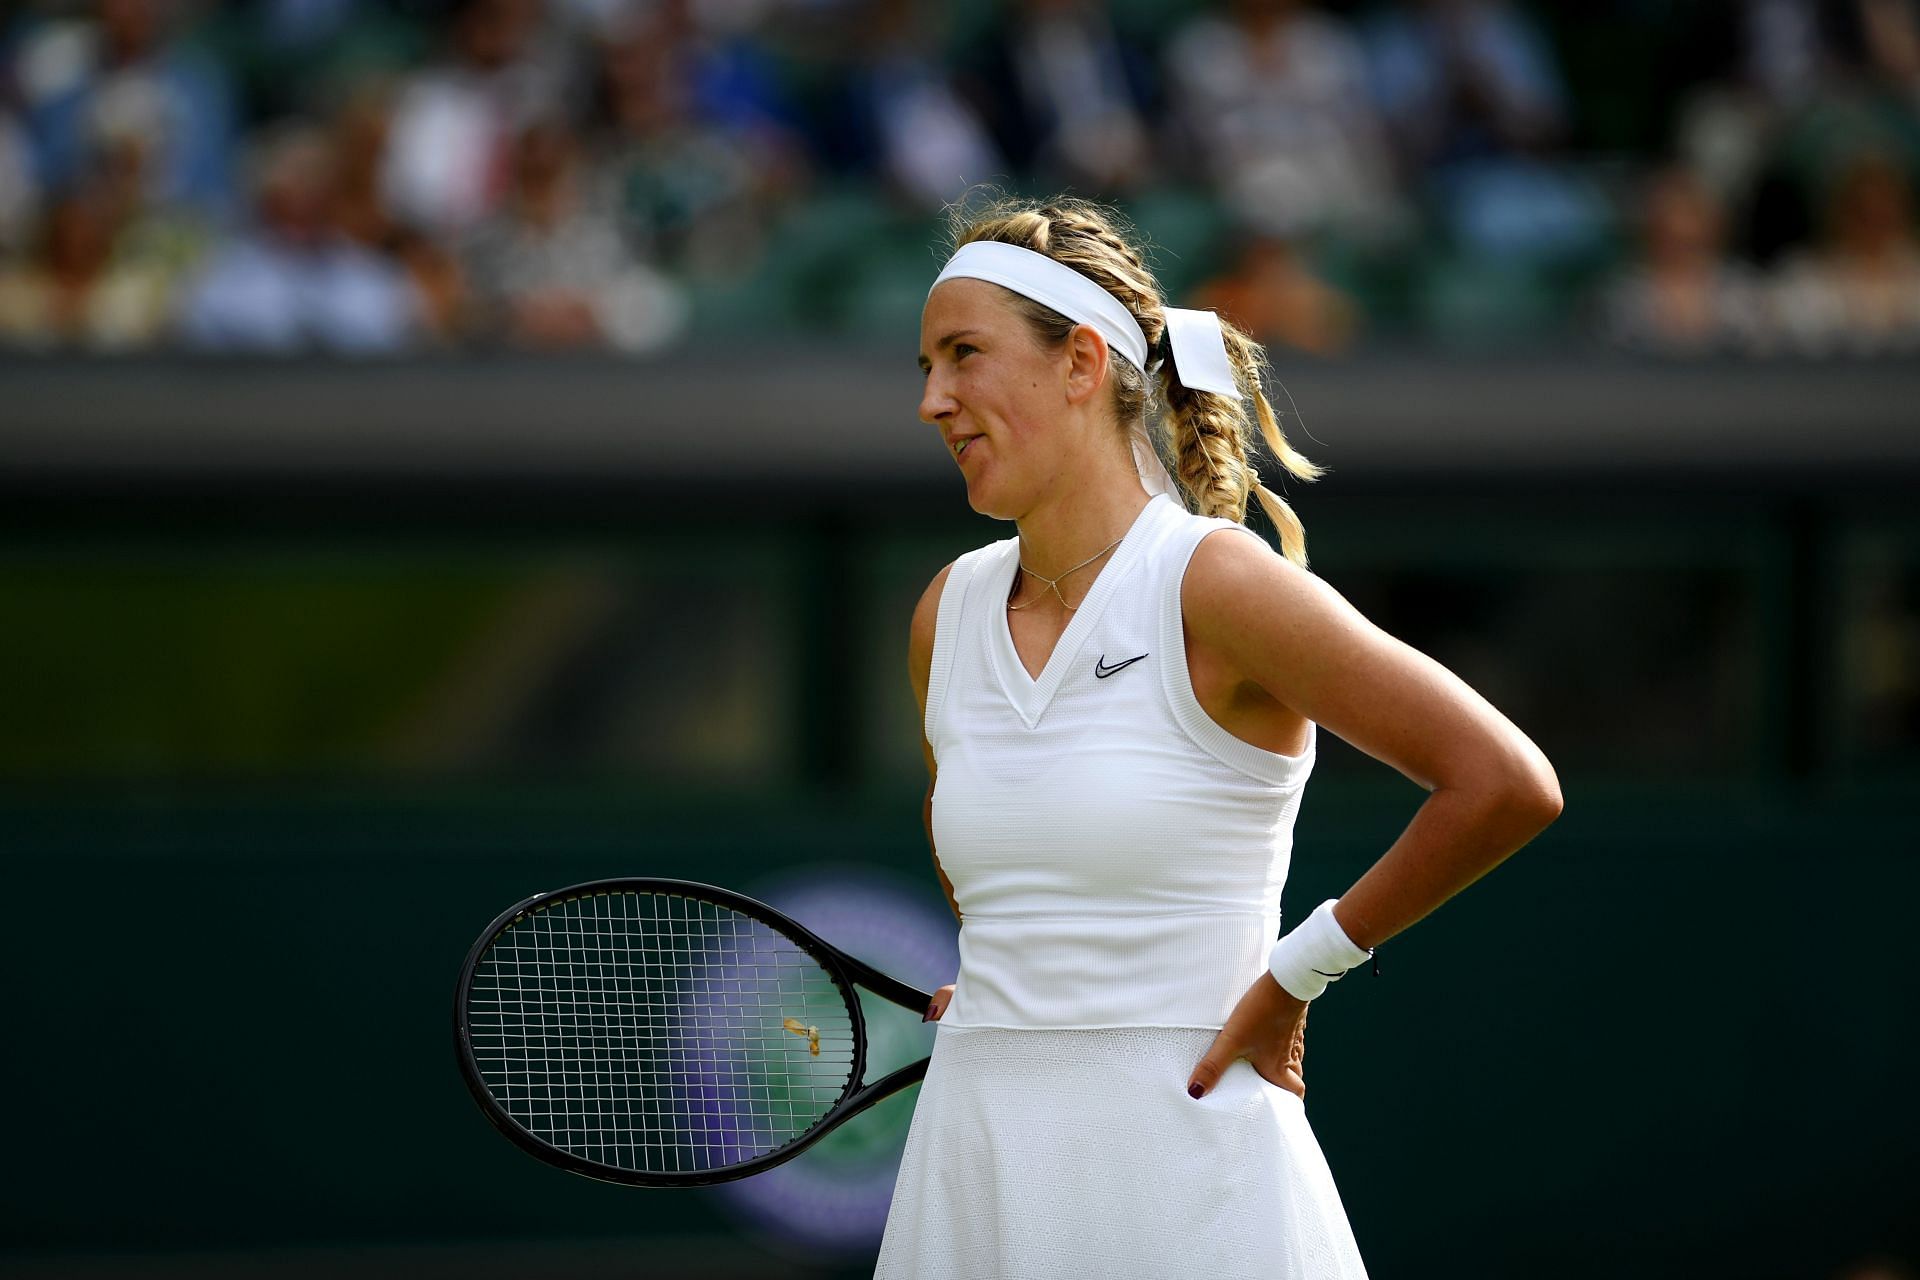 Players such as Victoria Azarenka, Aryna Sabalenka, Daniil Medvedev and Andrey Rublev suffered the consequences of the 2022 ban